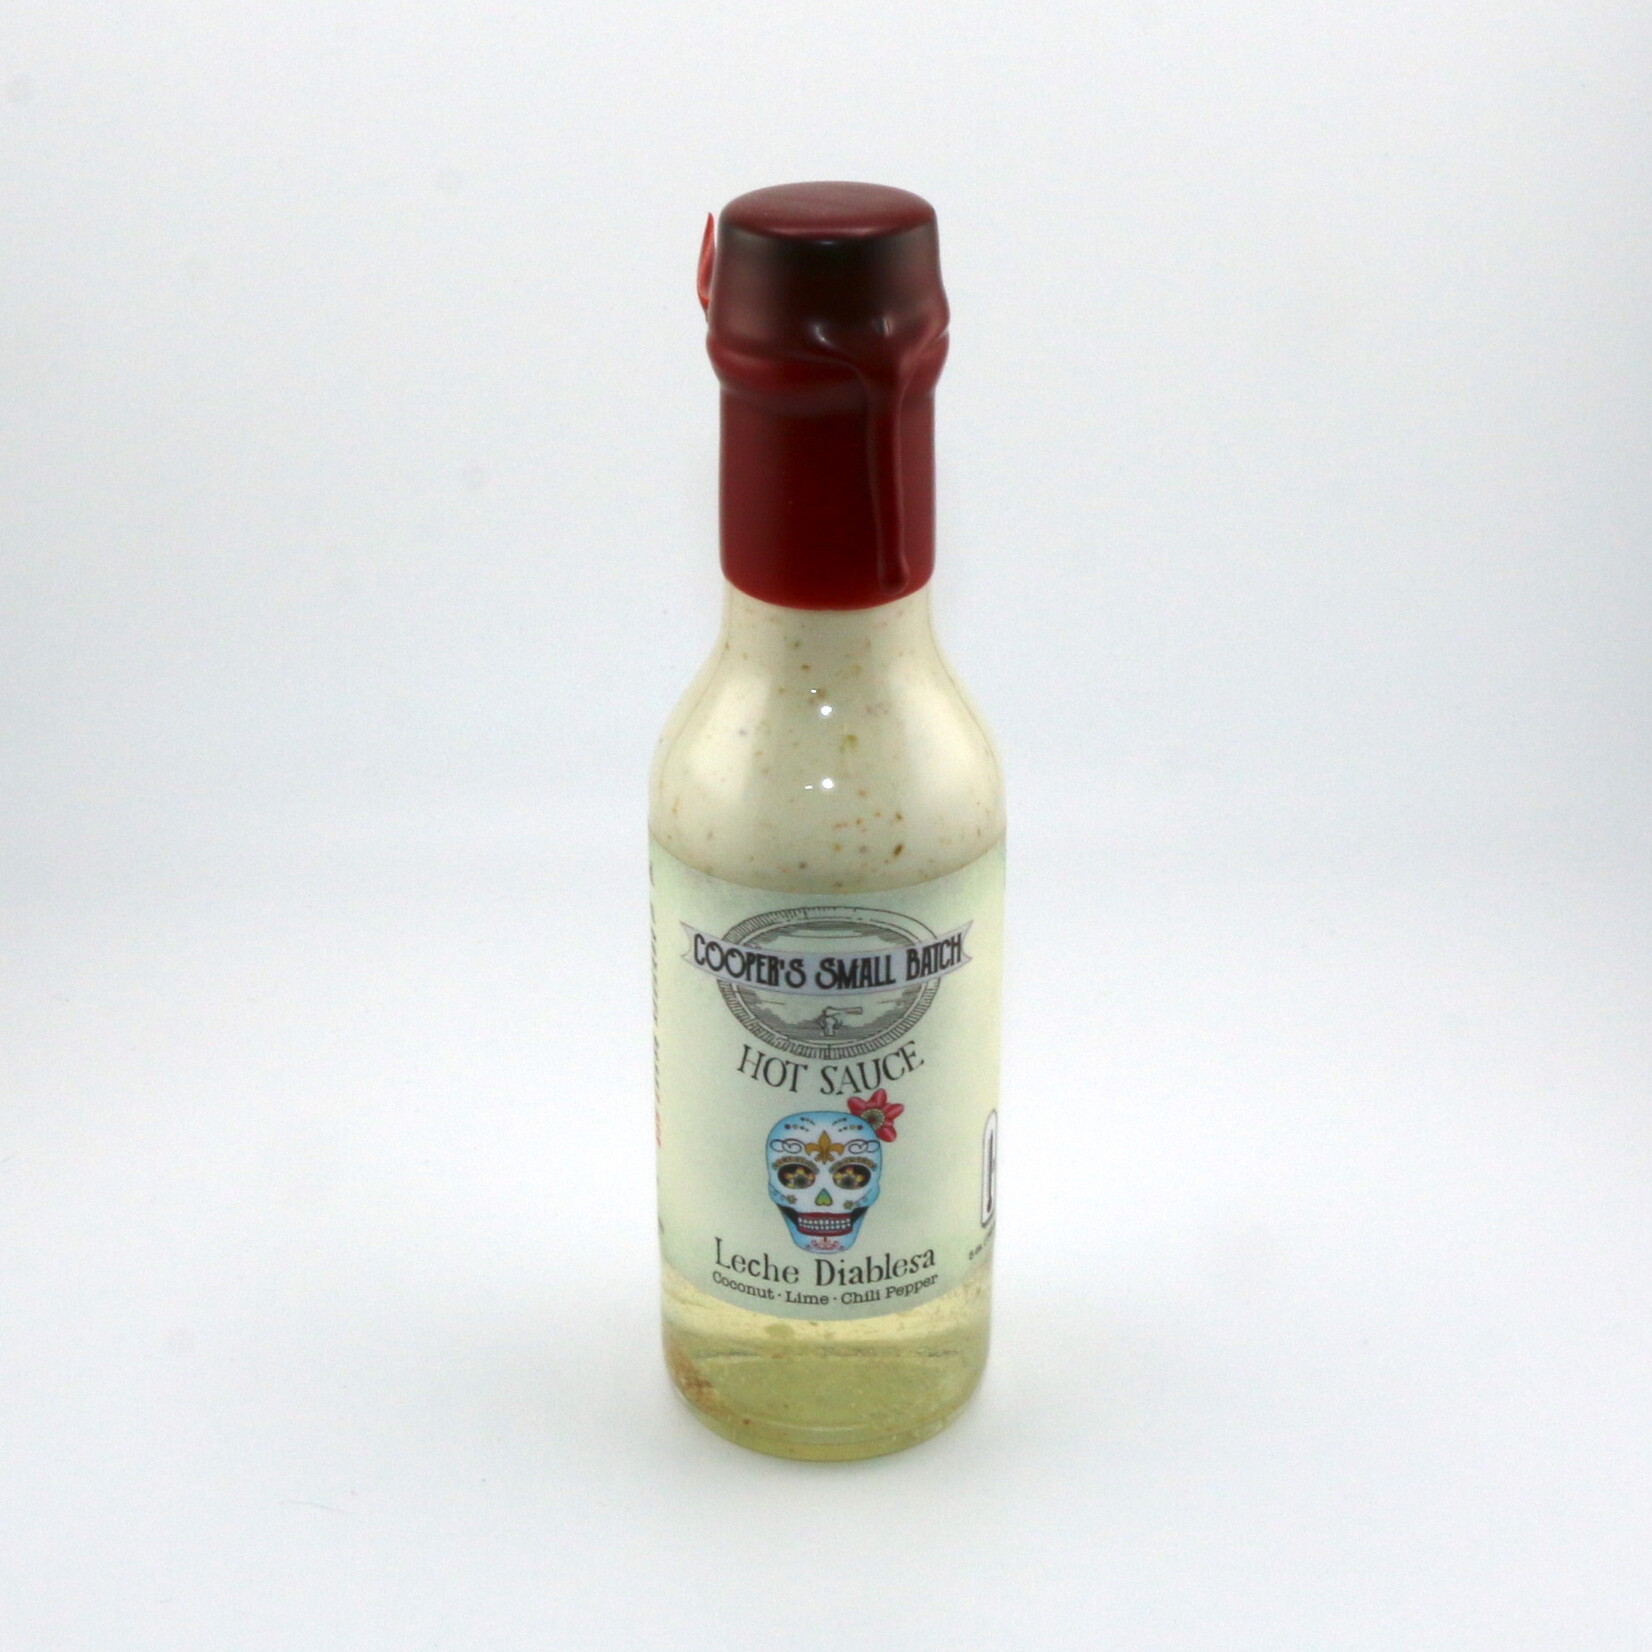 Coopers Small Batch Cooper's Small Batch Leche Diablesa Hot Sauce